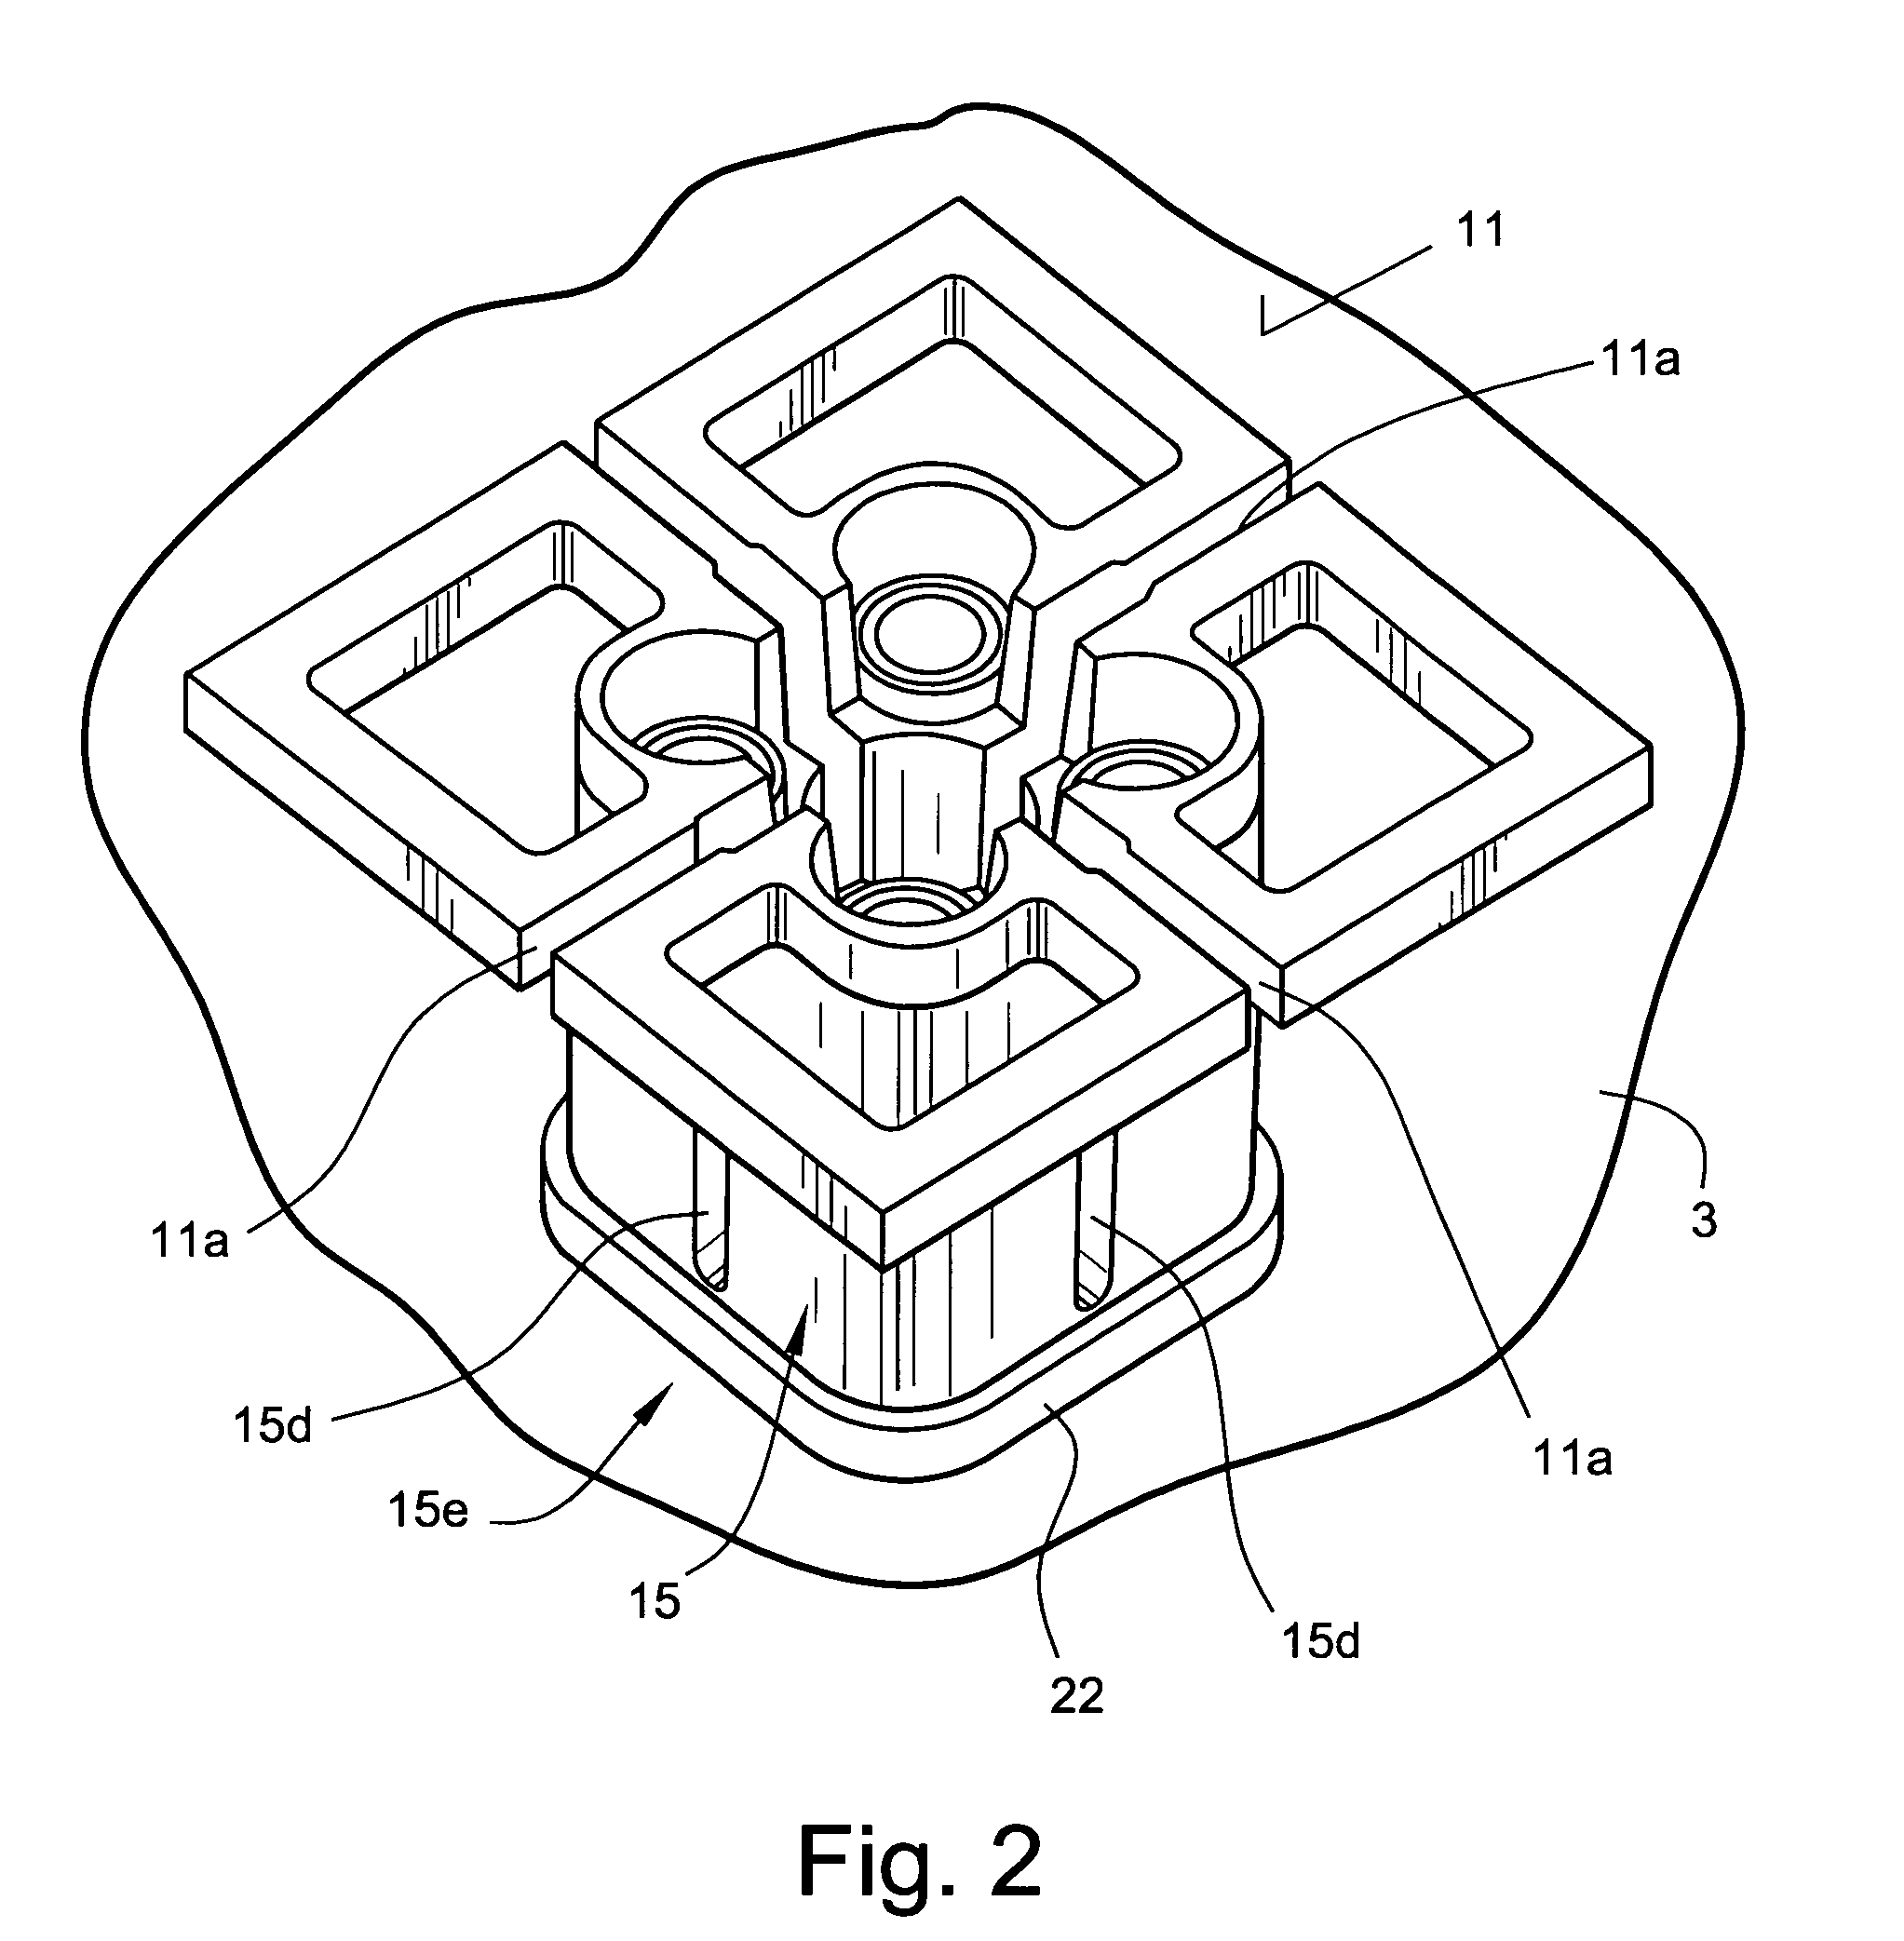 Antenna having at least one dipole or an antenna element arrangement similar to a dipole